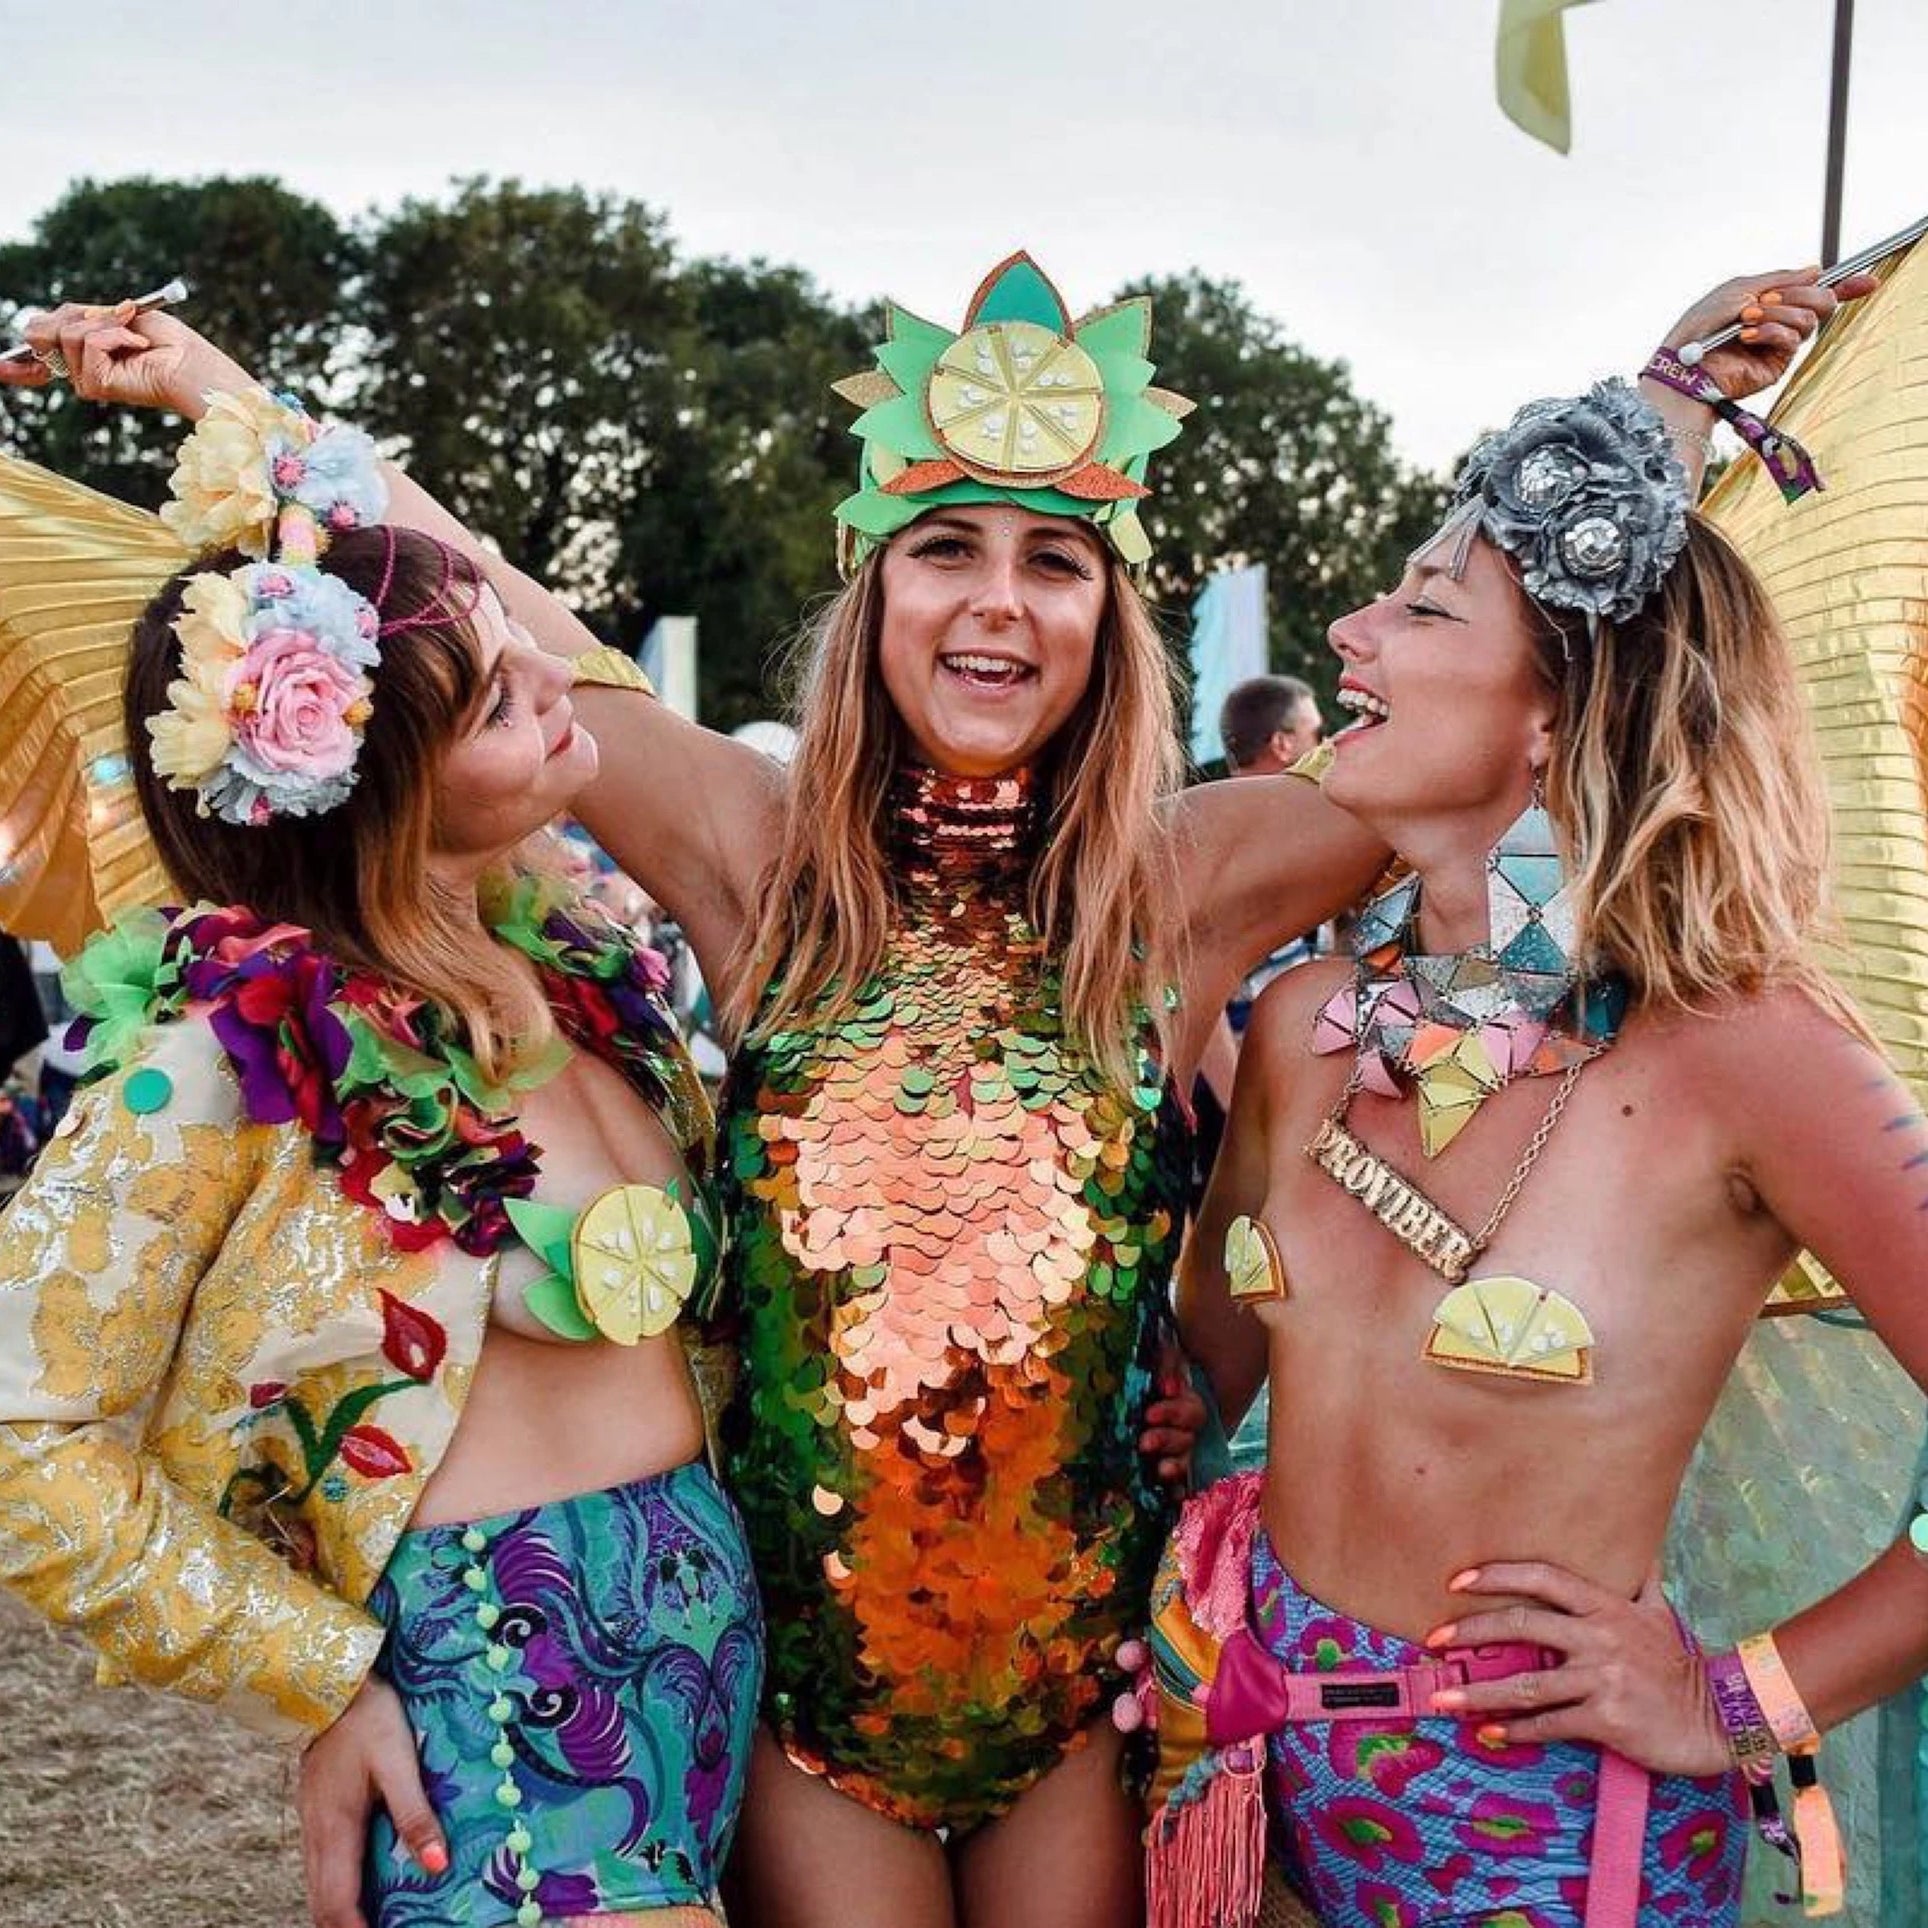 Three friends in sequin clothing at a festival